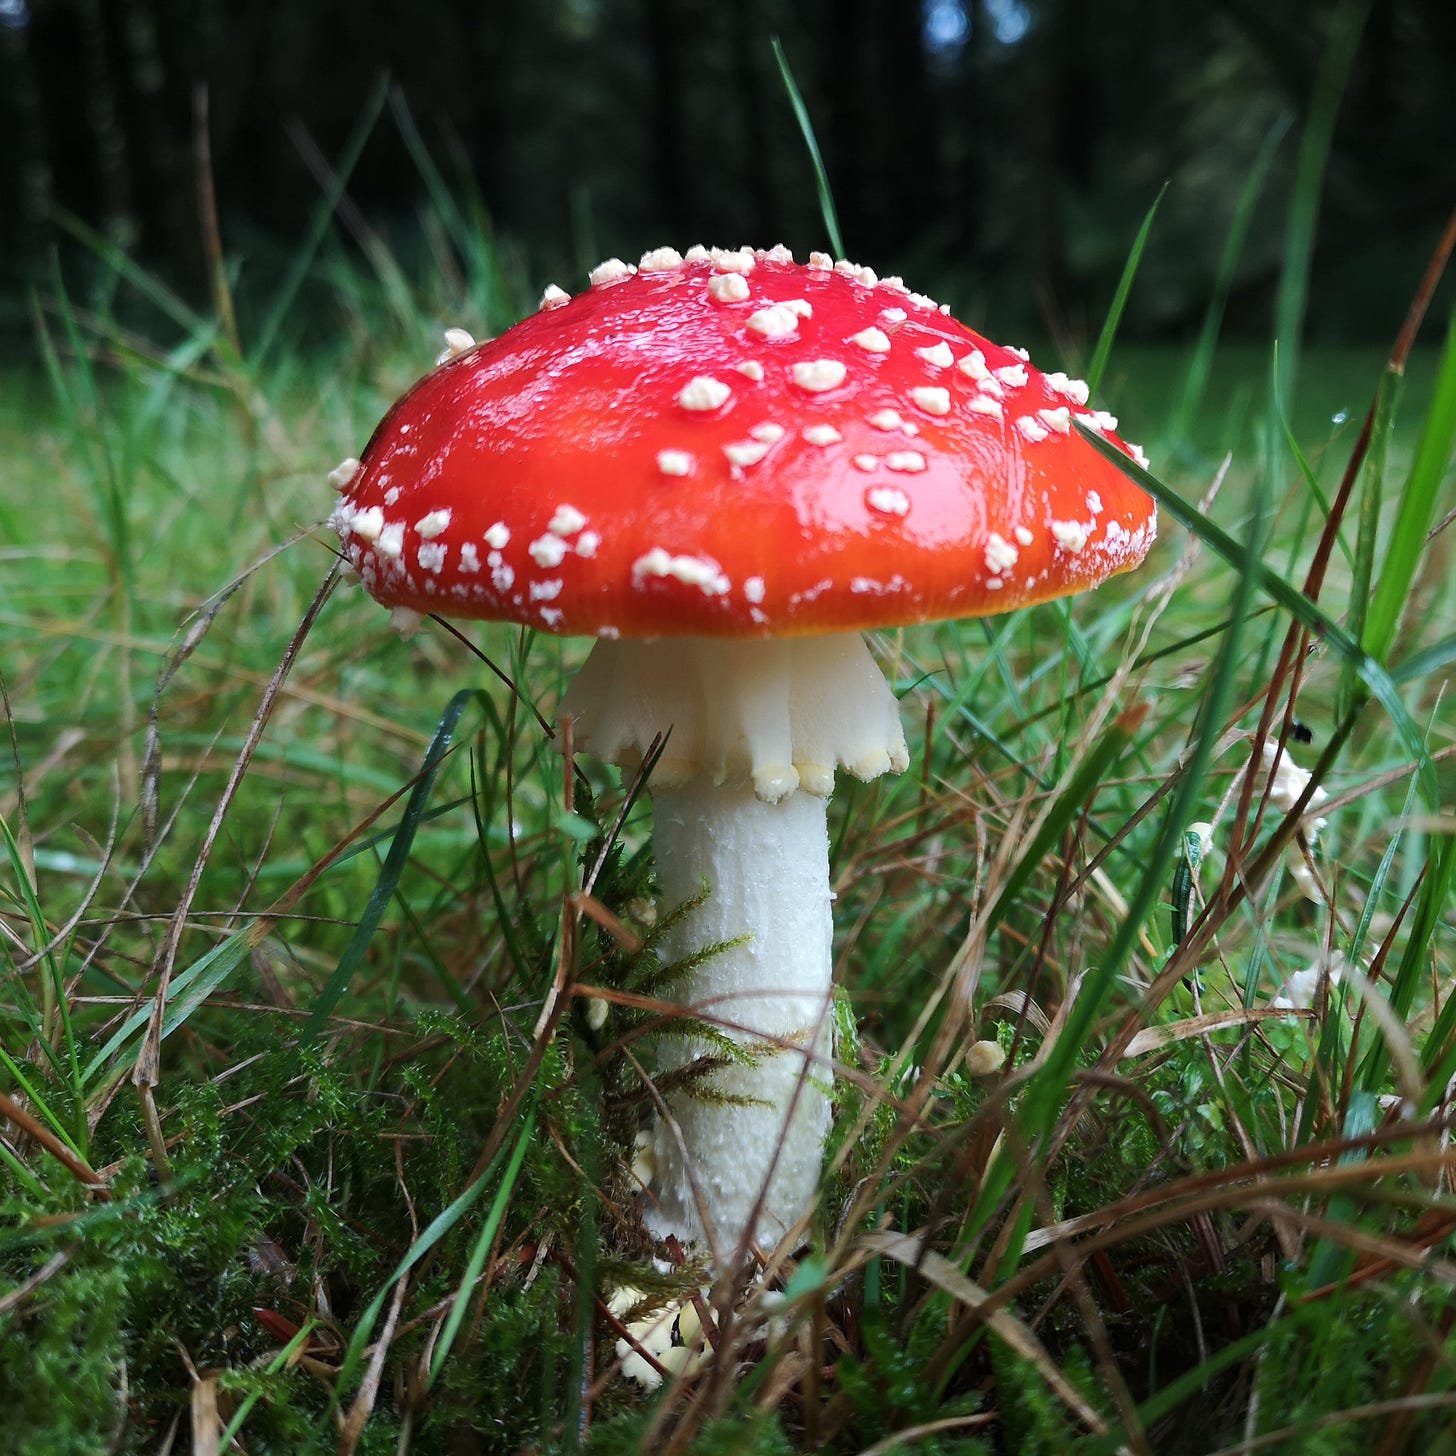 Image description: a tall proud fly agaric mushroom amid the grass and moss. The white stalk is upright and has a perfect little frilly skirt beneath the curved red cap, which is glistening and covered in distinctive white spots. Not pictured, Katie skipping around the moor with utter delight.